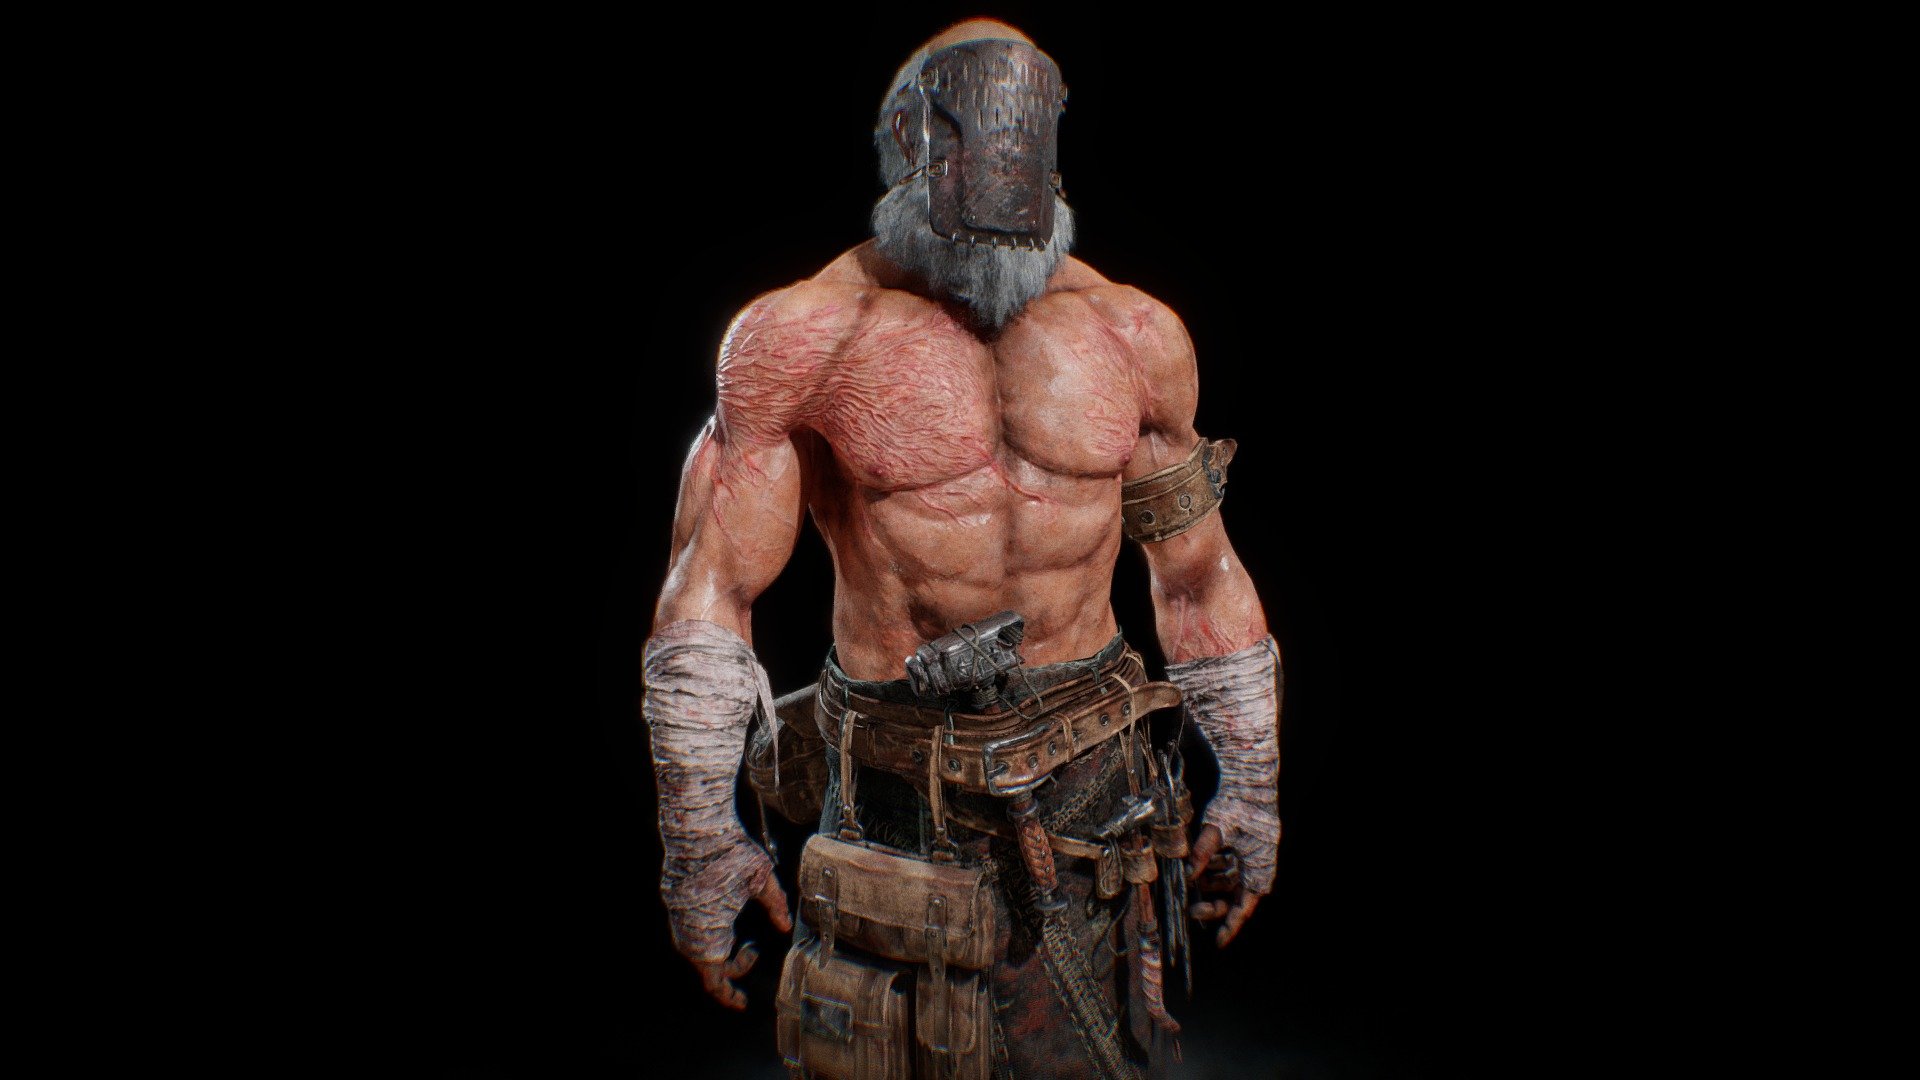 Blacksmith concept from the Medieval Back and Forth challenge on artstation.

Concept art credits - https://www.artstation.com/artwork/Jvr23A

Check out the full project on the link below.
https://www.artstation.com/artwork/aobO5z

Backstory- After many battles as a servant of his lord, the old man retires from his duty and works as a blacksmith in the village.
Children are scared of the odd grandpa's scars in the beginning but are soon attracted by the heroic stories he told when forging. The
Blacksmith met the ones from the future several times when he was a soldier, even though they do not have direct communication, the
blacksmith still remembers how the future people look like, especially the dressing style. The stories and influence were left in his mind
until now 3d model